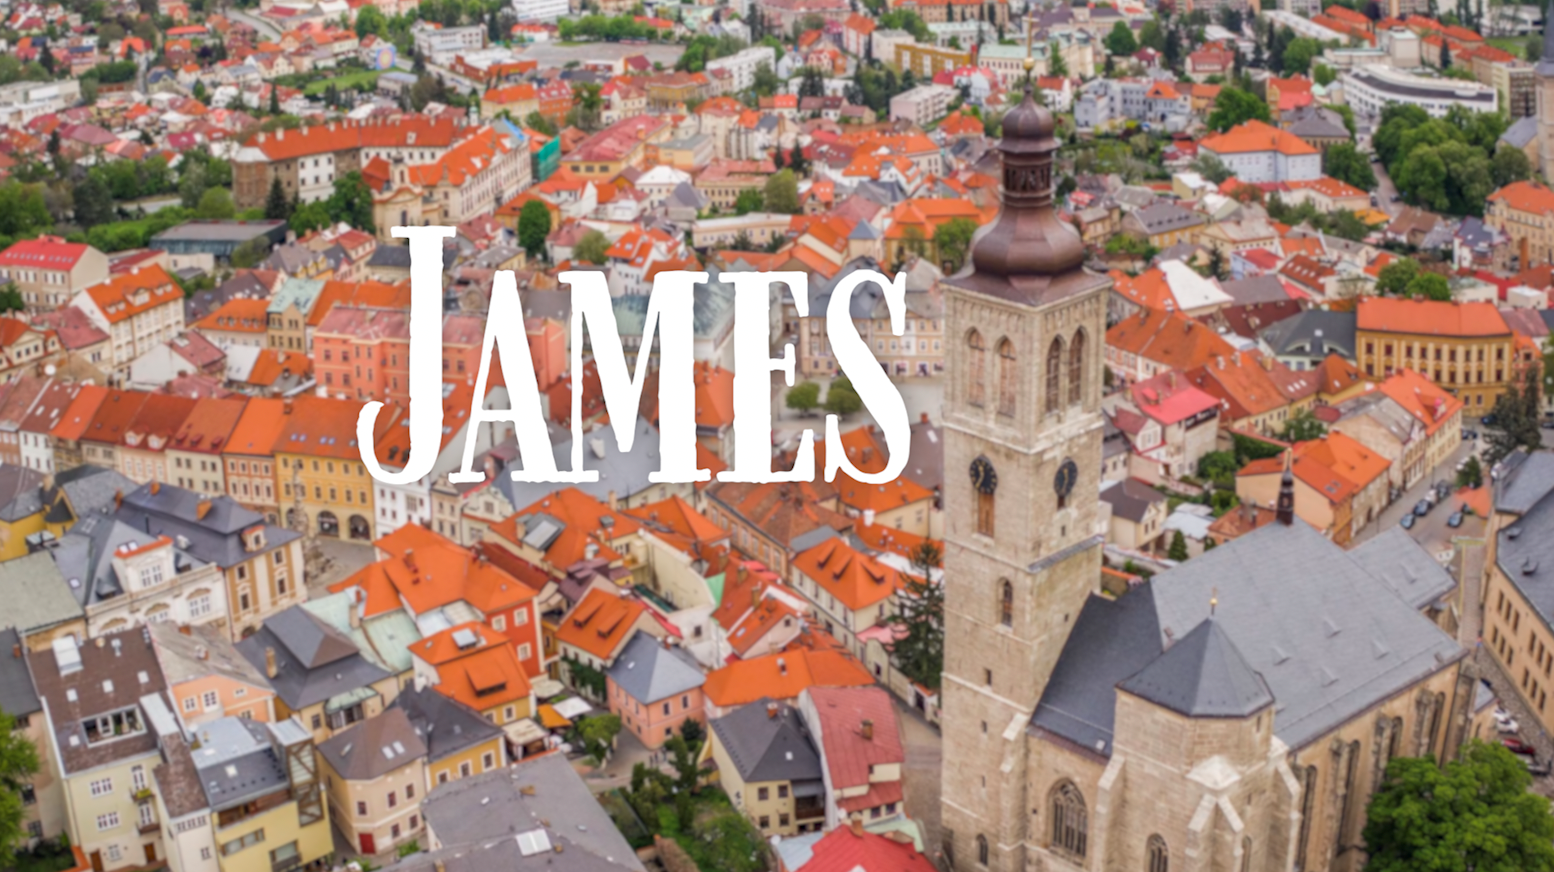 Graphic for Oct. 24, 2021 sermon on the book of James.